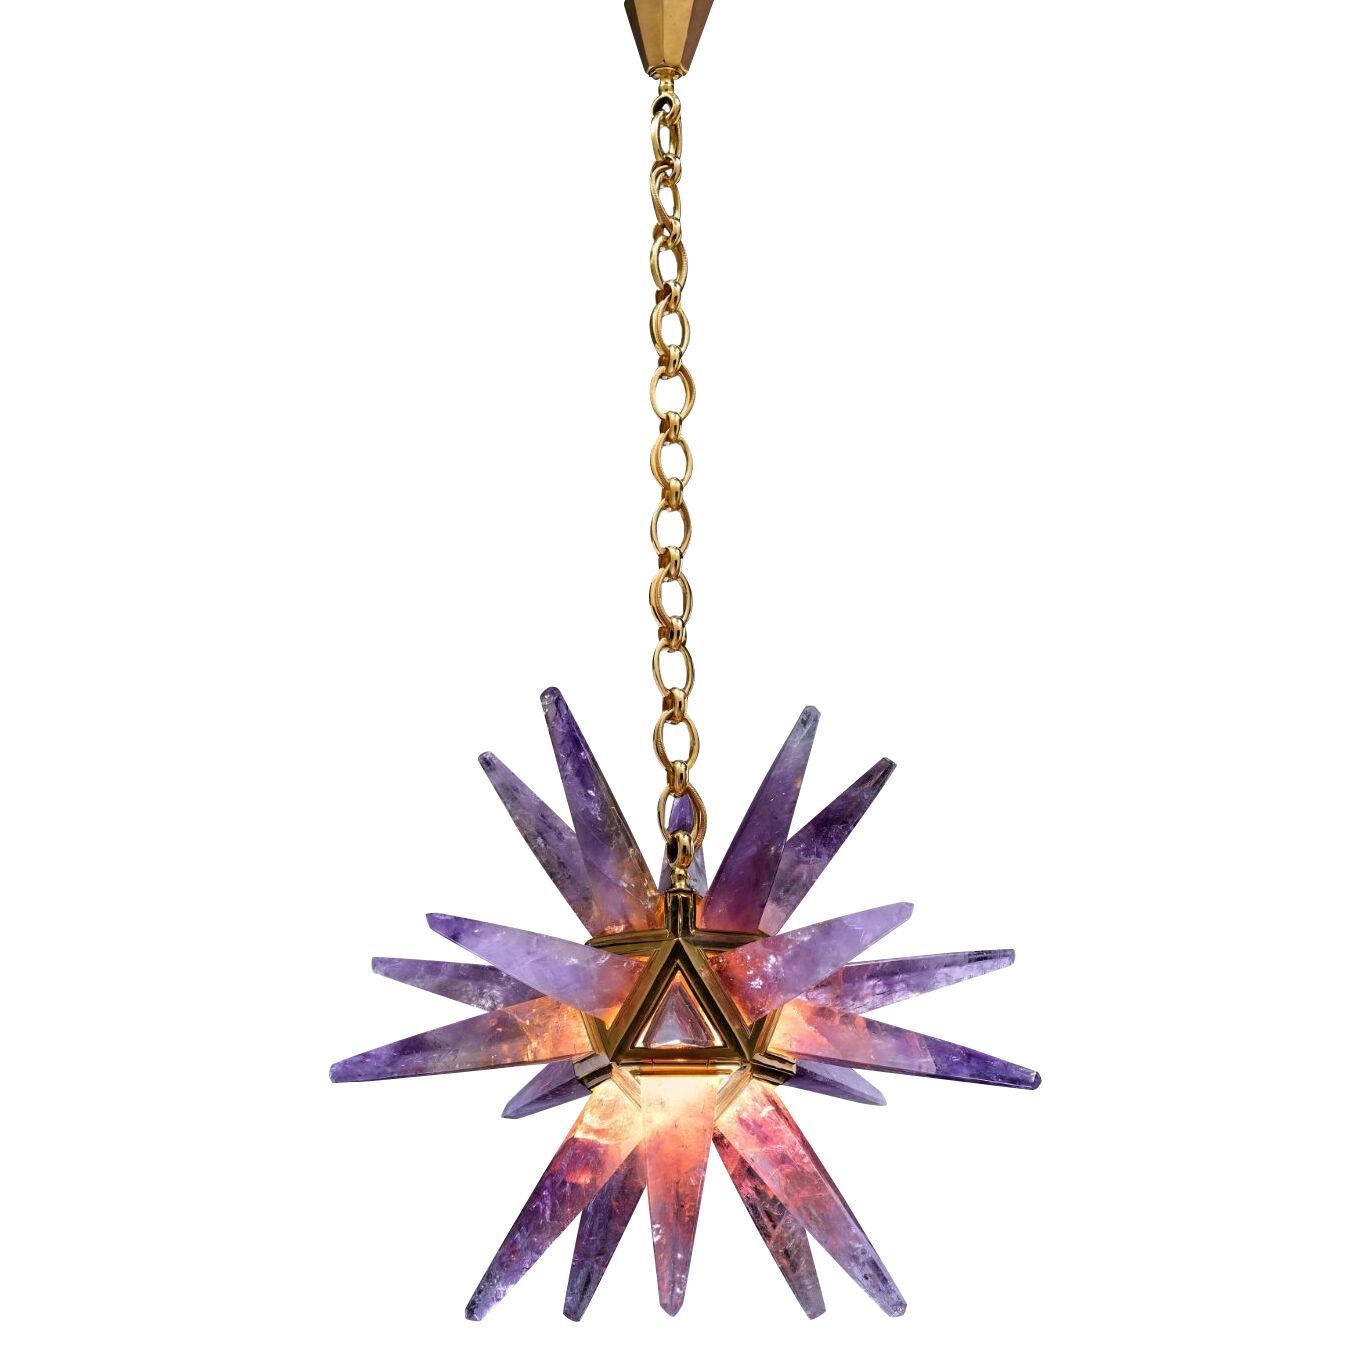 Amethyst Star III Chandelier, Gold Edition by Alexandre Vossion